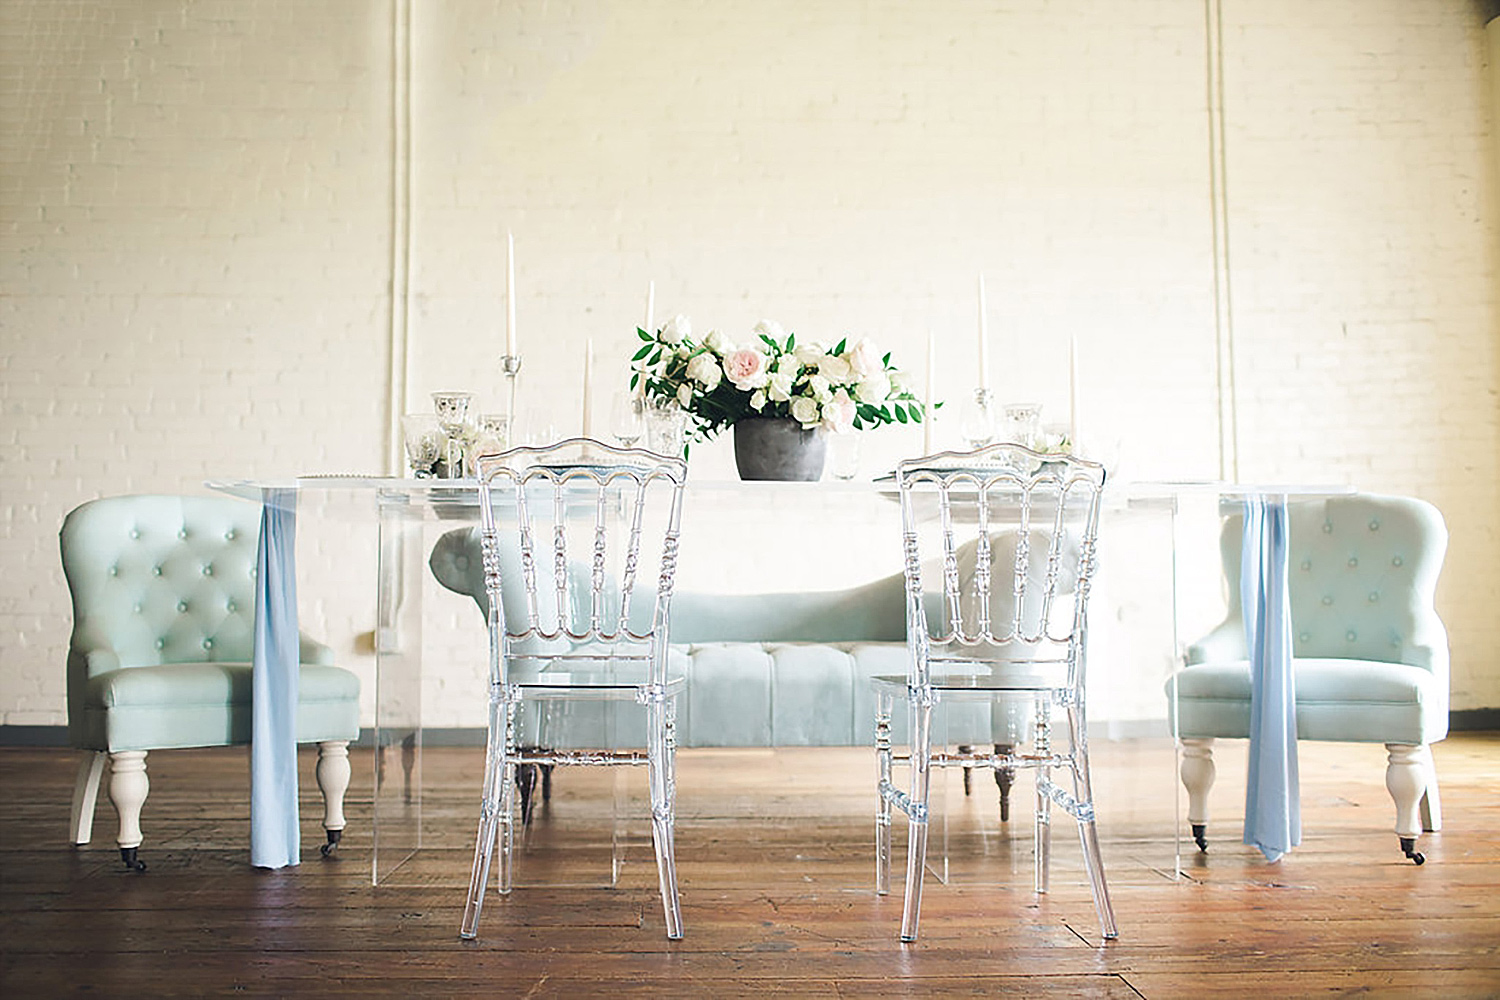 Table top feature with Bride of North Texas Southern Industrial acrylic table and dusty blue chairs